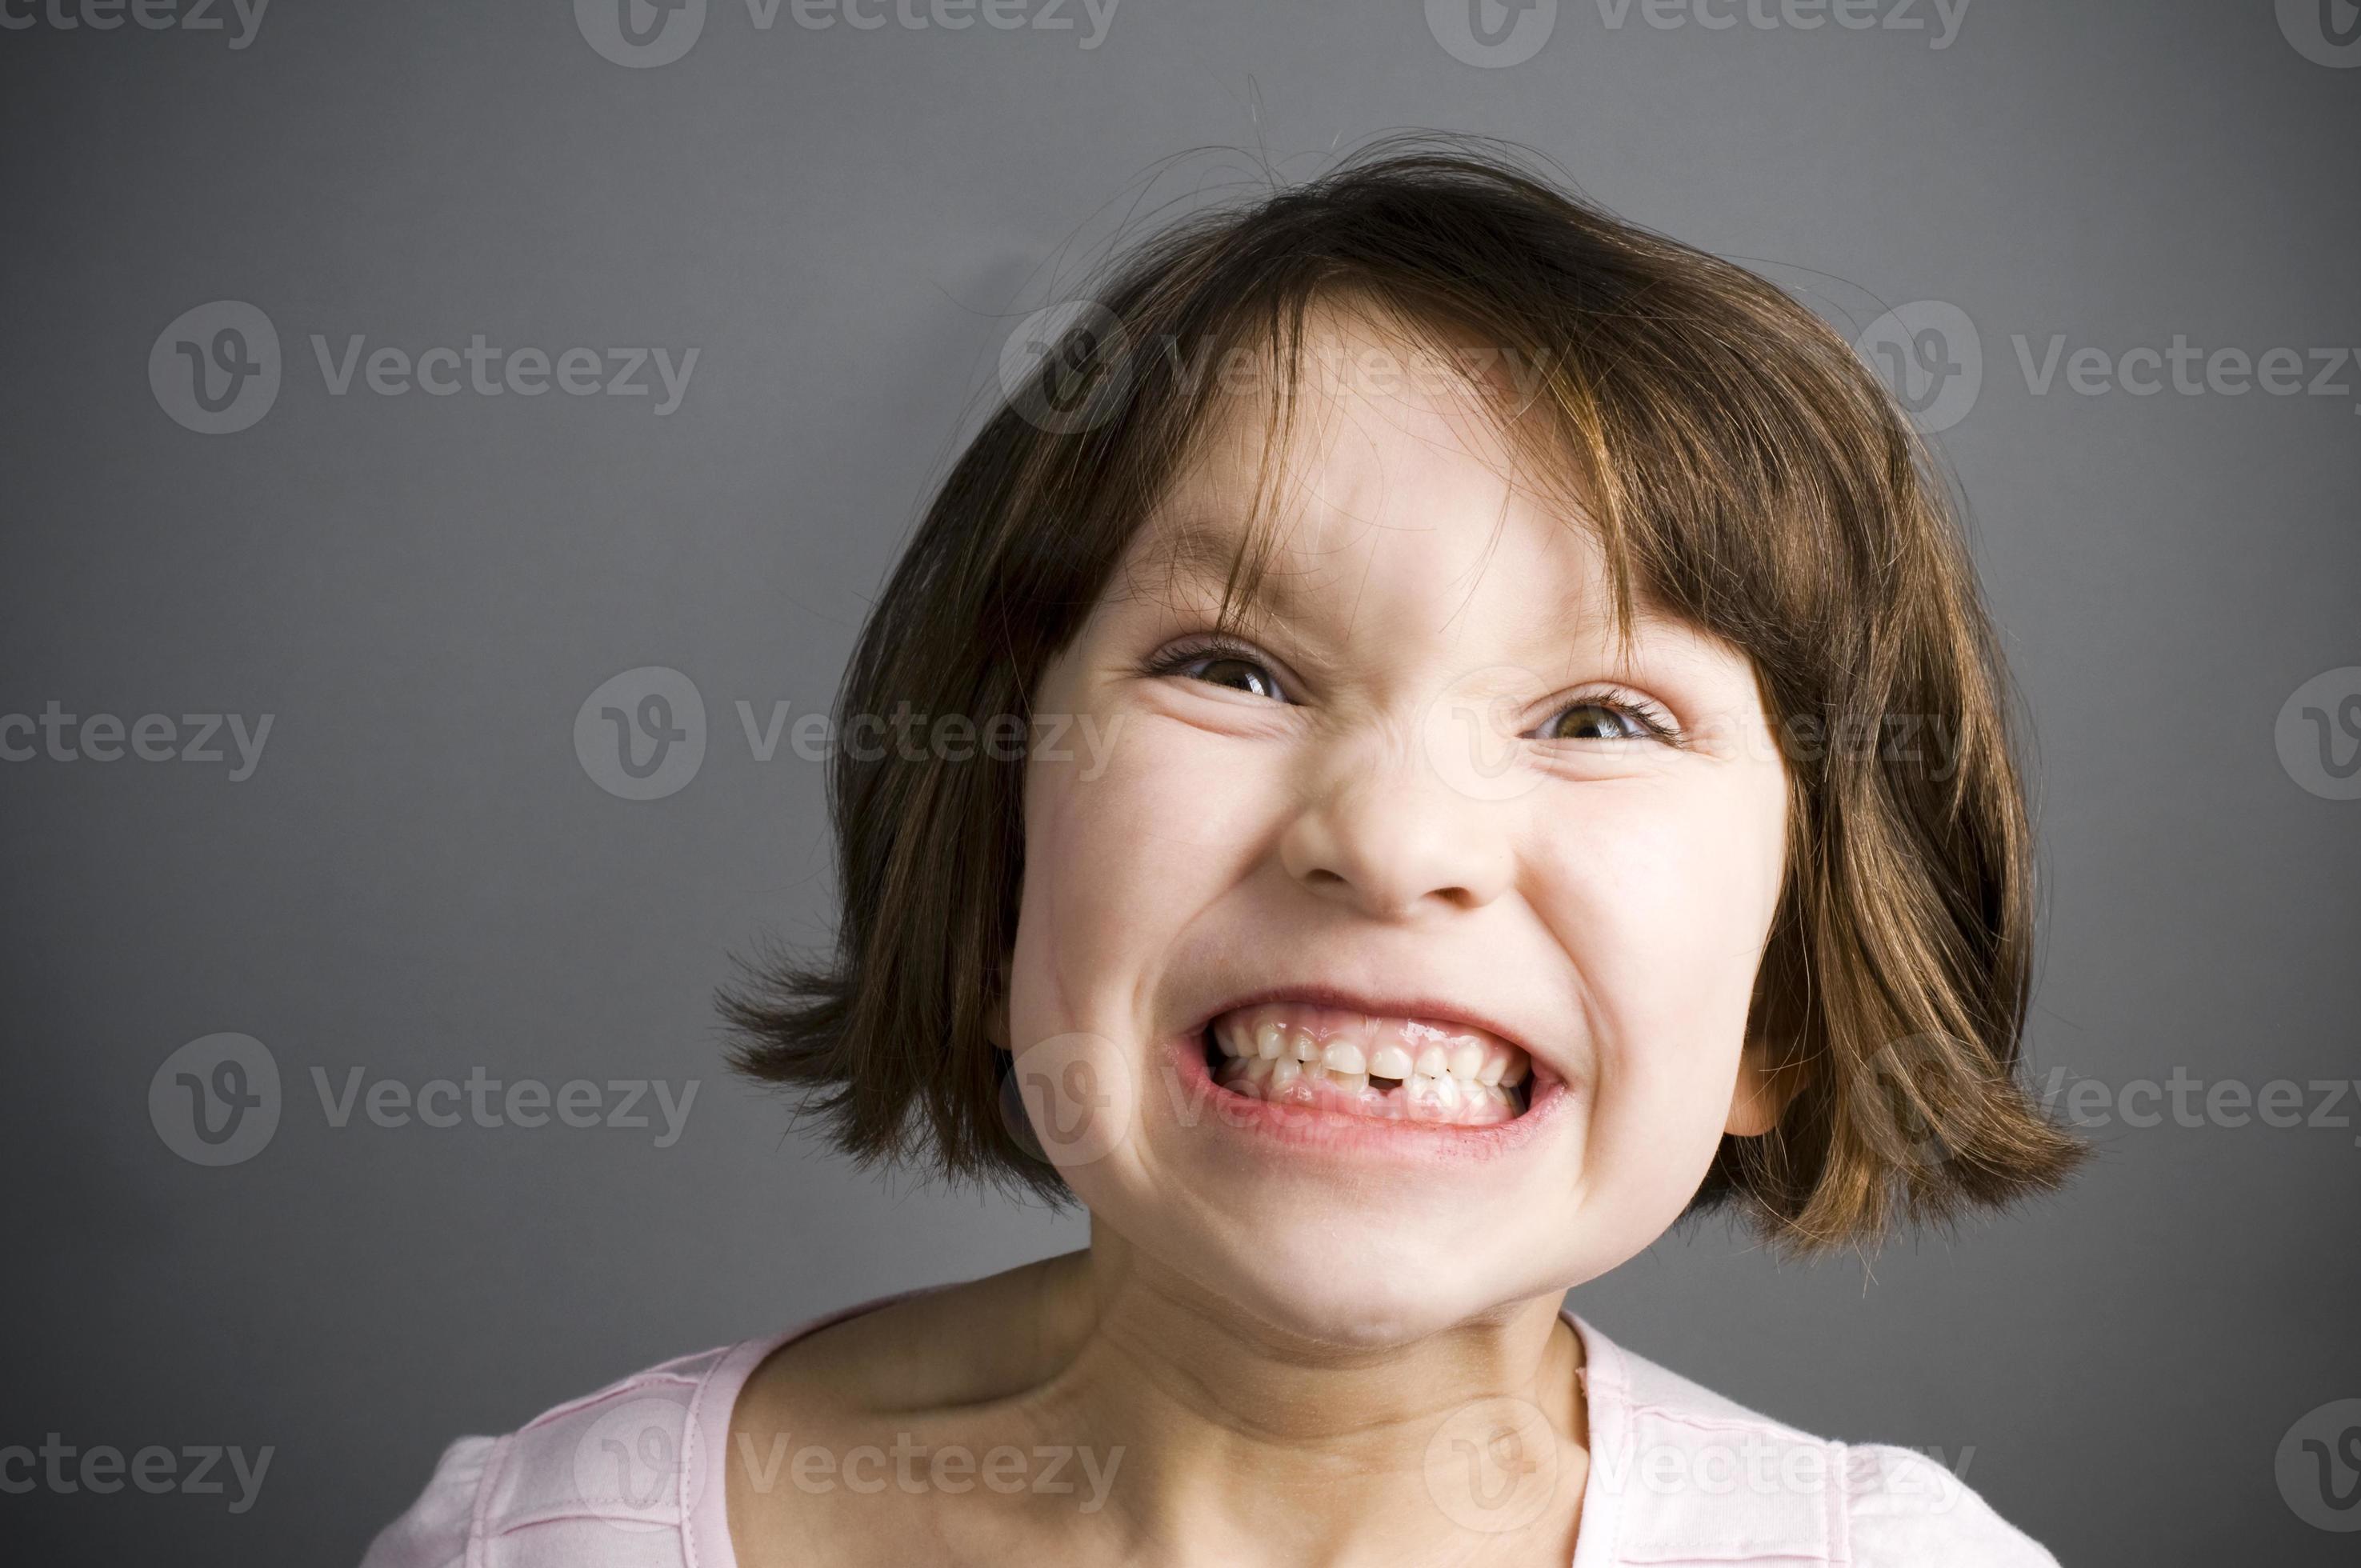 Funny Face, Little Girl 945341 Stock Photo at Vecteezy